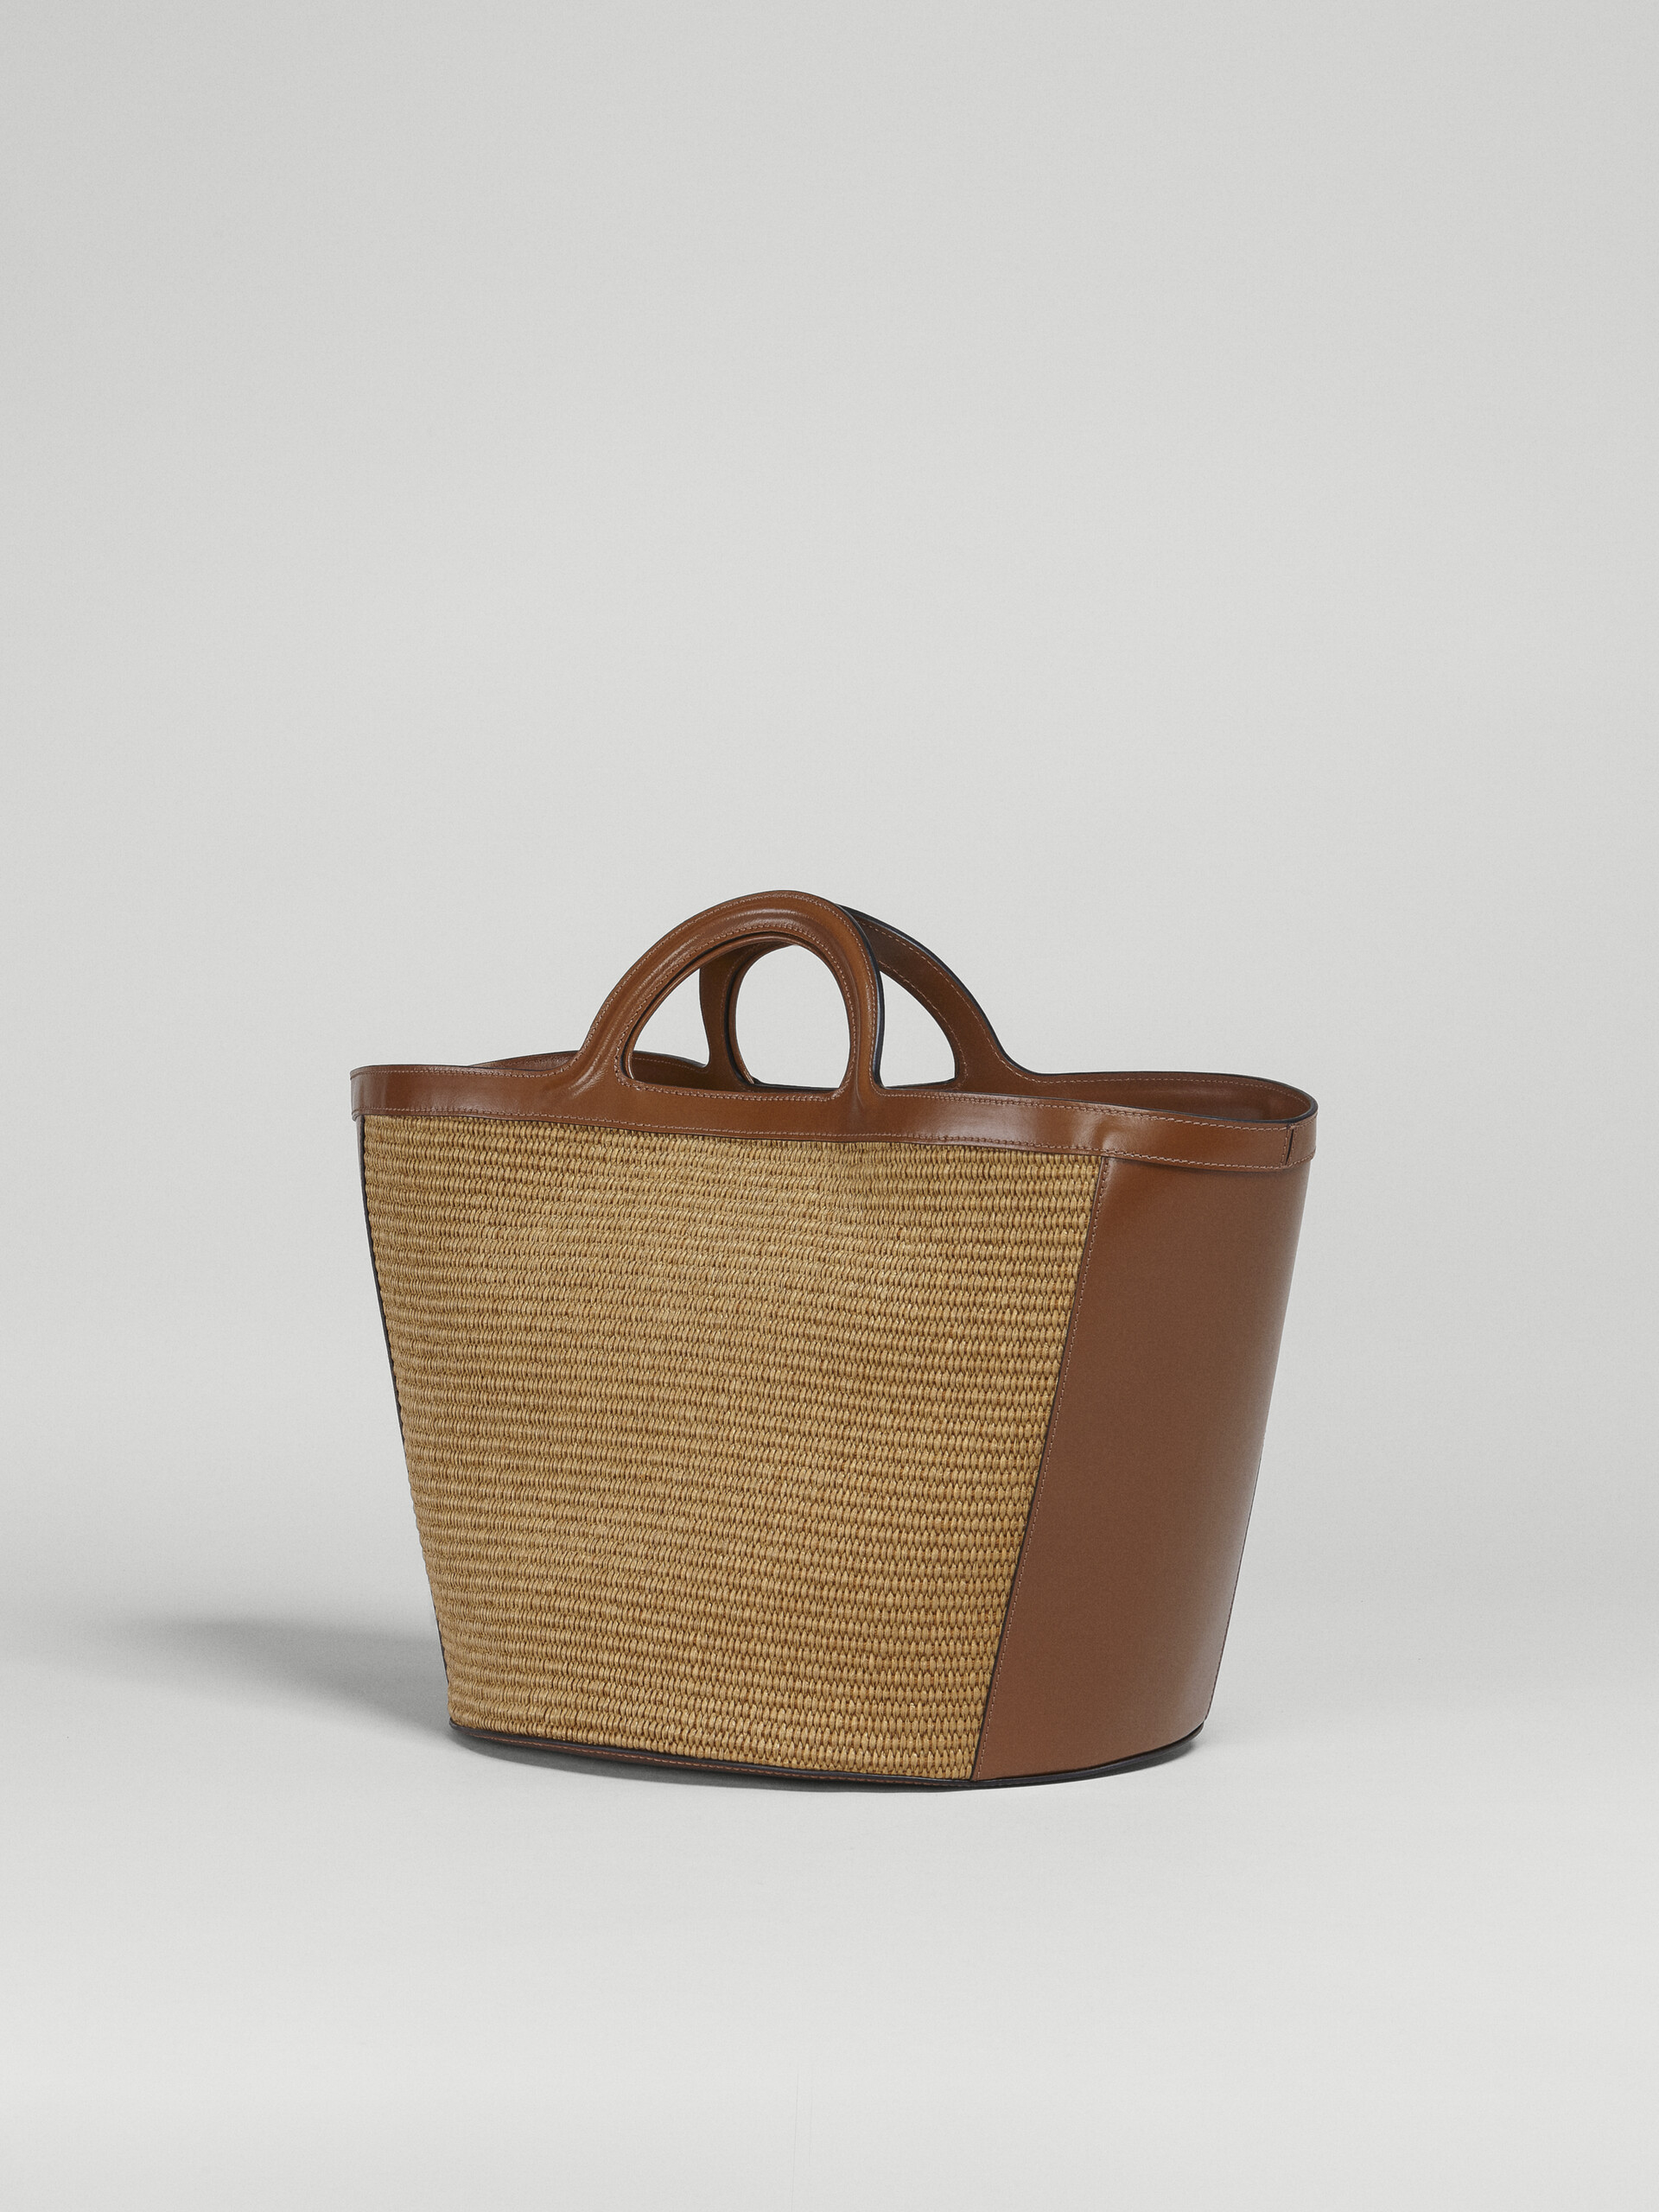 TROPICALIA large bag in brown leather and raffia - Handbags - Image 3